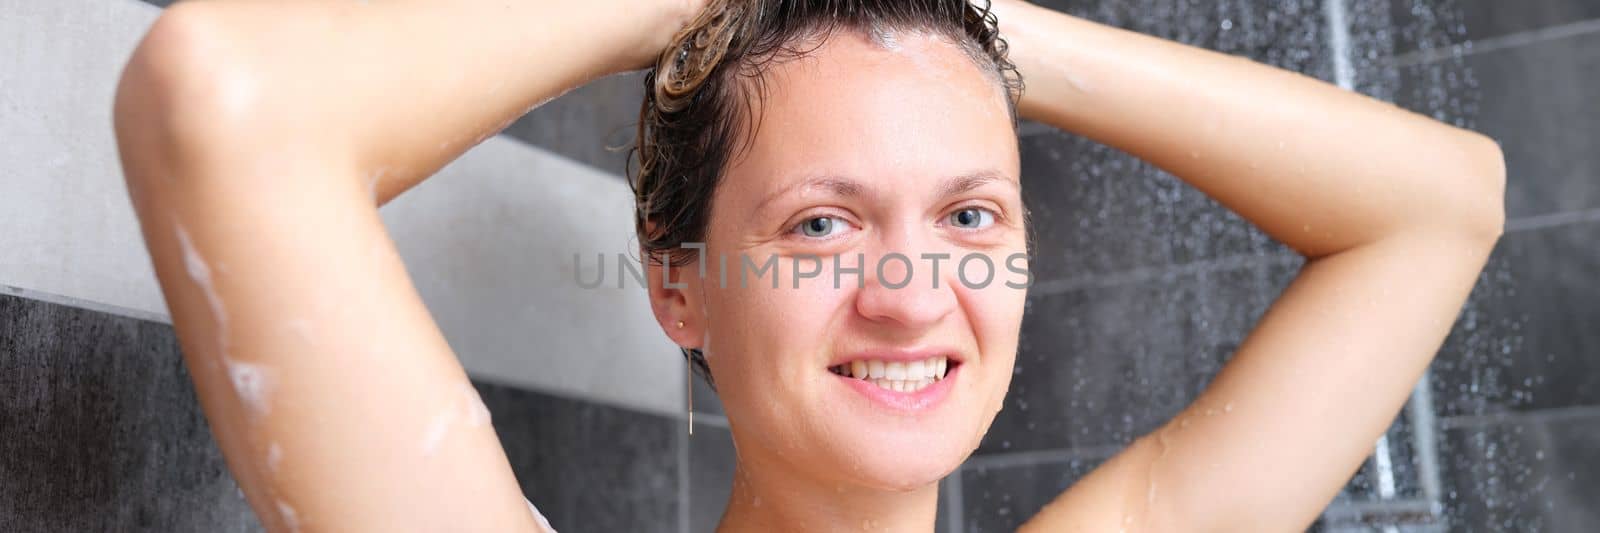 Young beautiful woman under the shower in bathroom. Portrait of happy joyful woman in the shower